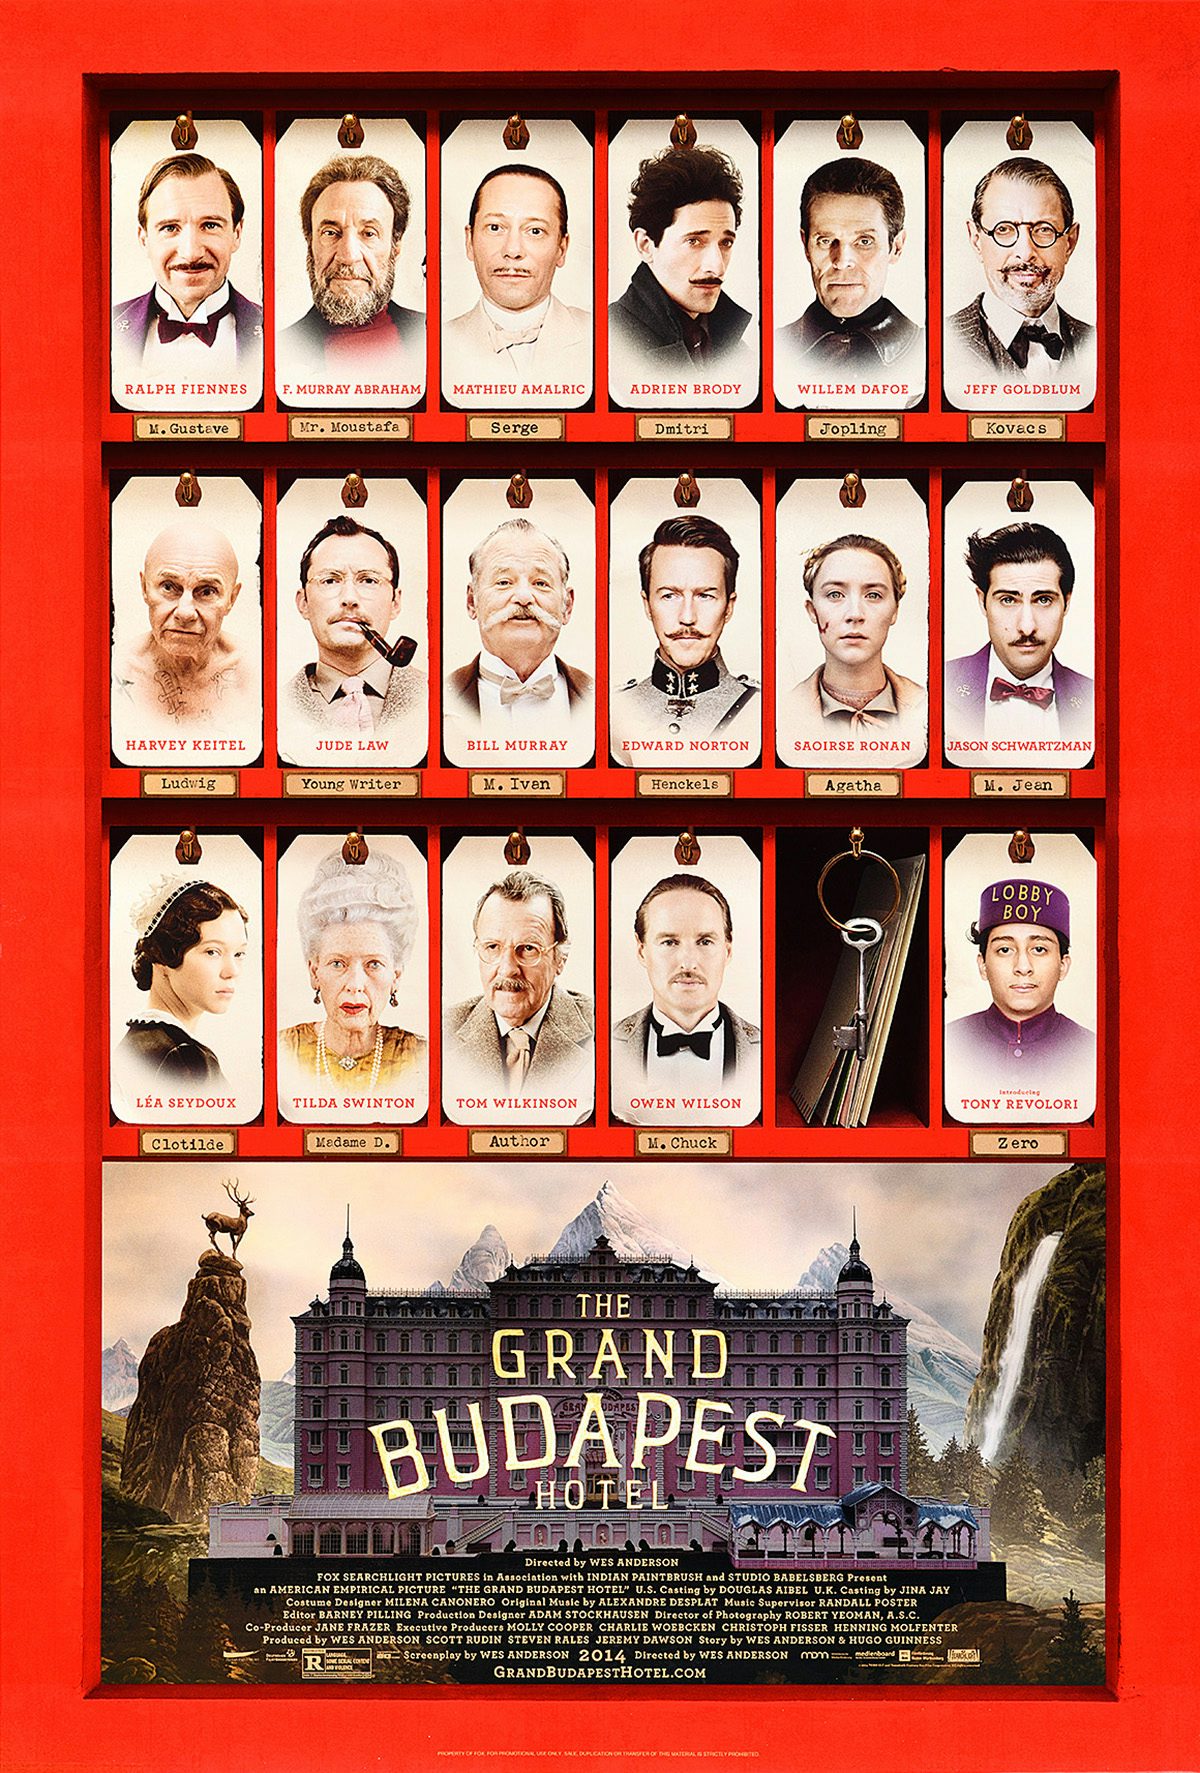 Poster design for The Grand Budapest Hotel featuring illustrated portraits of the 17 characters, and one illustration of a key, on room cards. These appear in rows above an illustration of the hotel in the film